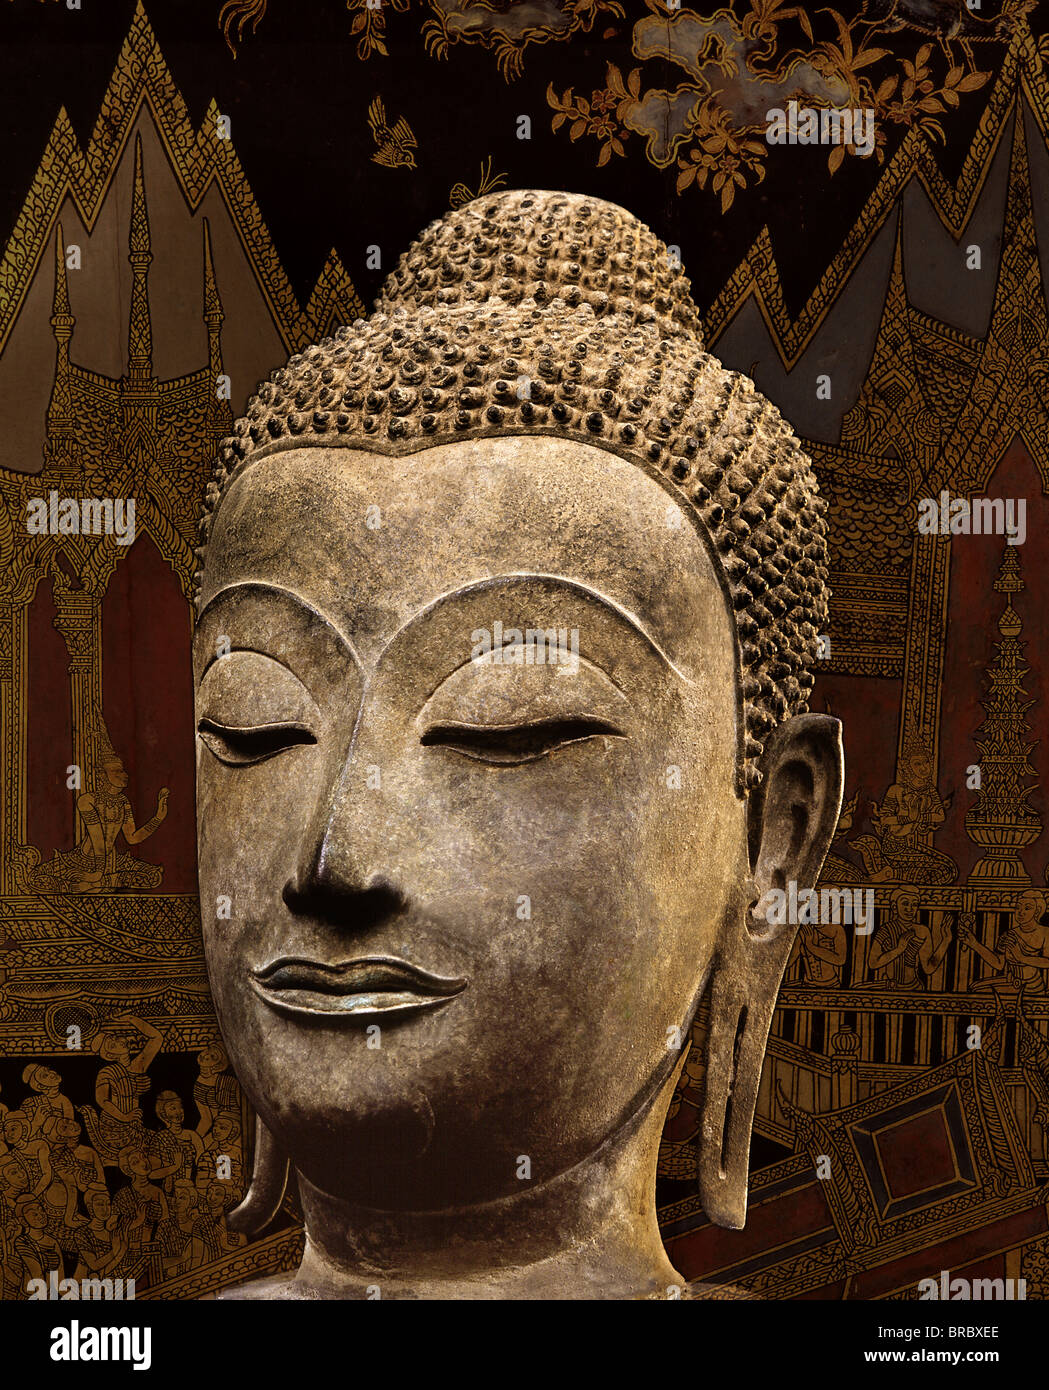 Head of a bronze Ayutthaya style Buddha image, from the 15th century, Thailand Stock Photo